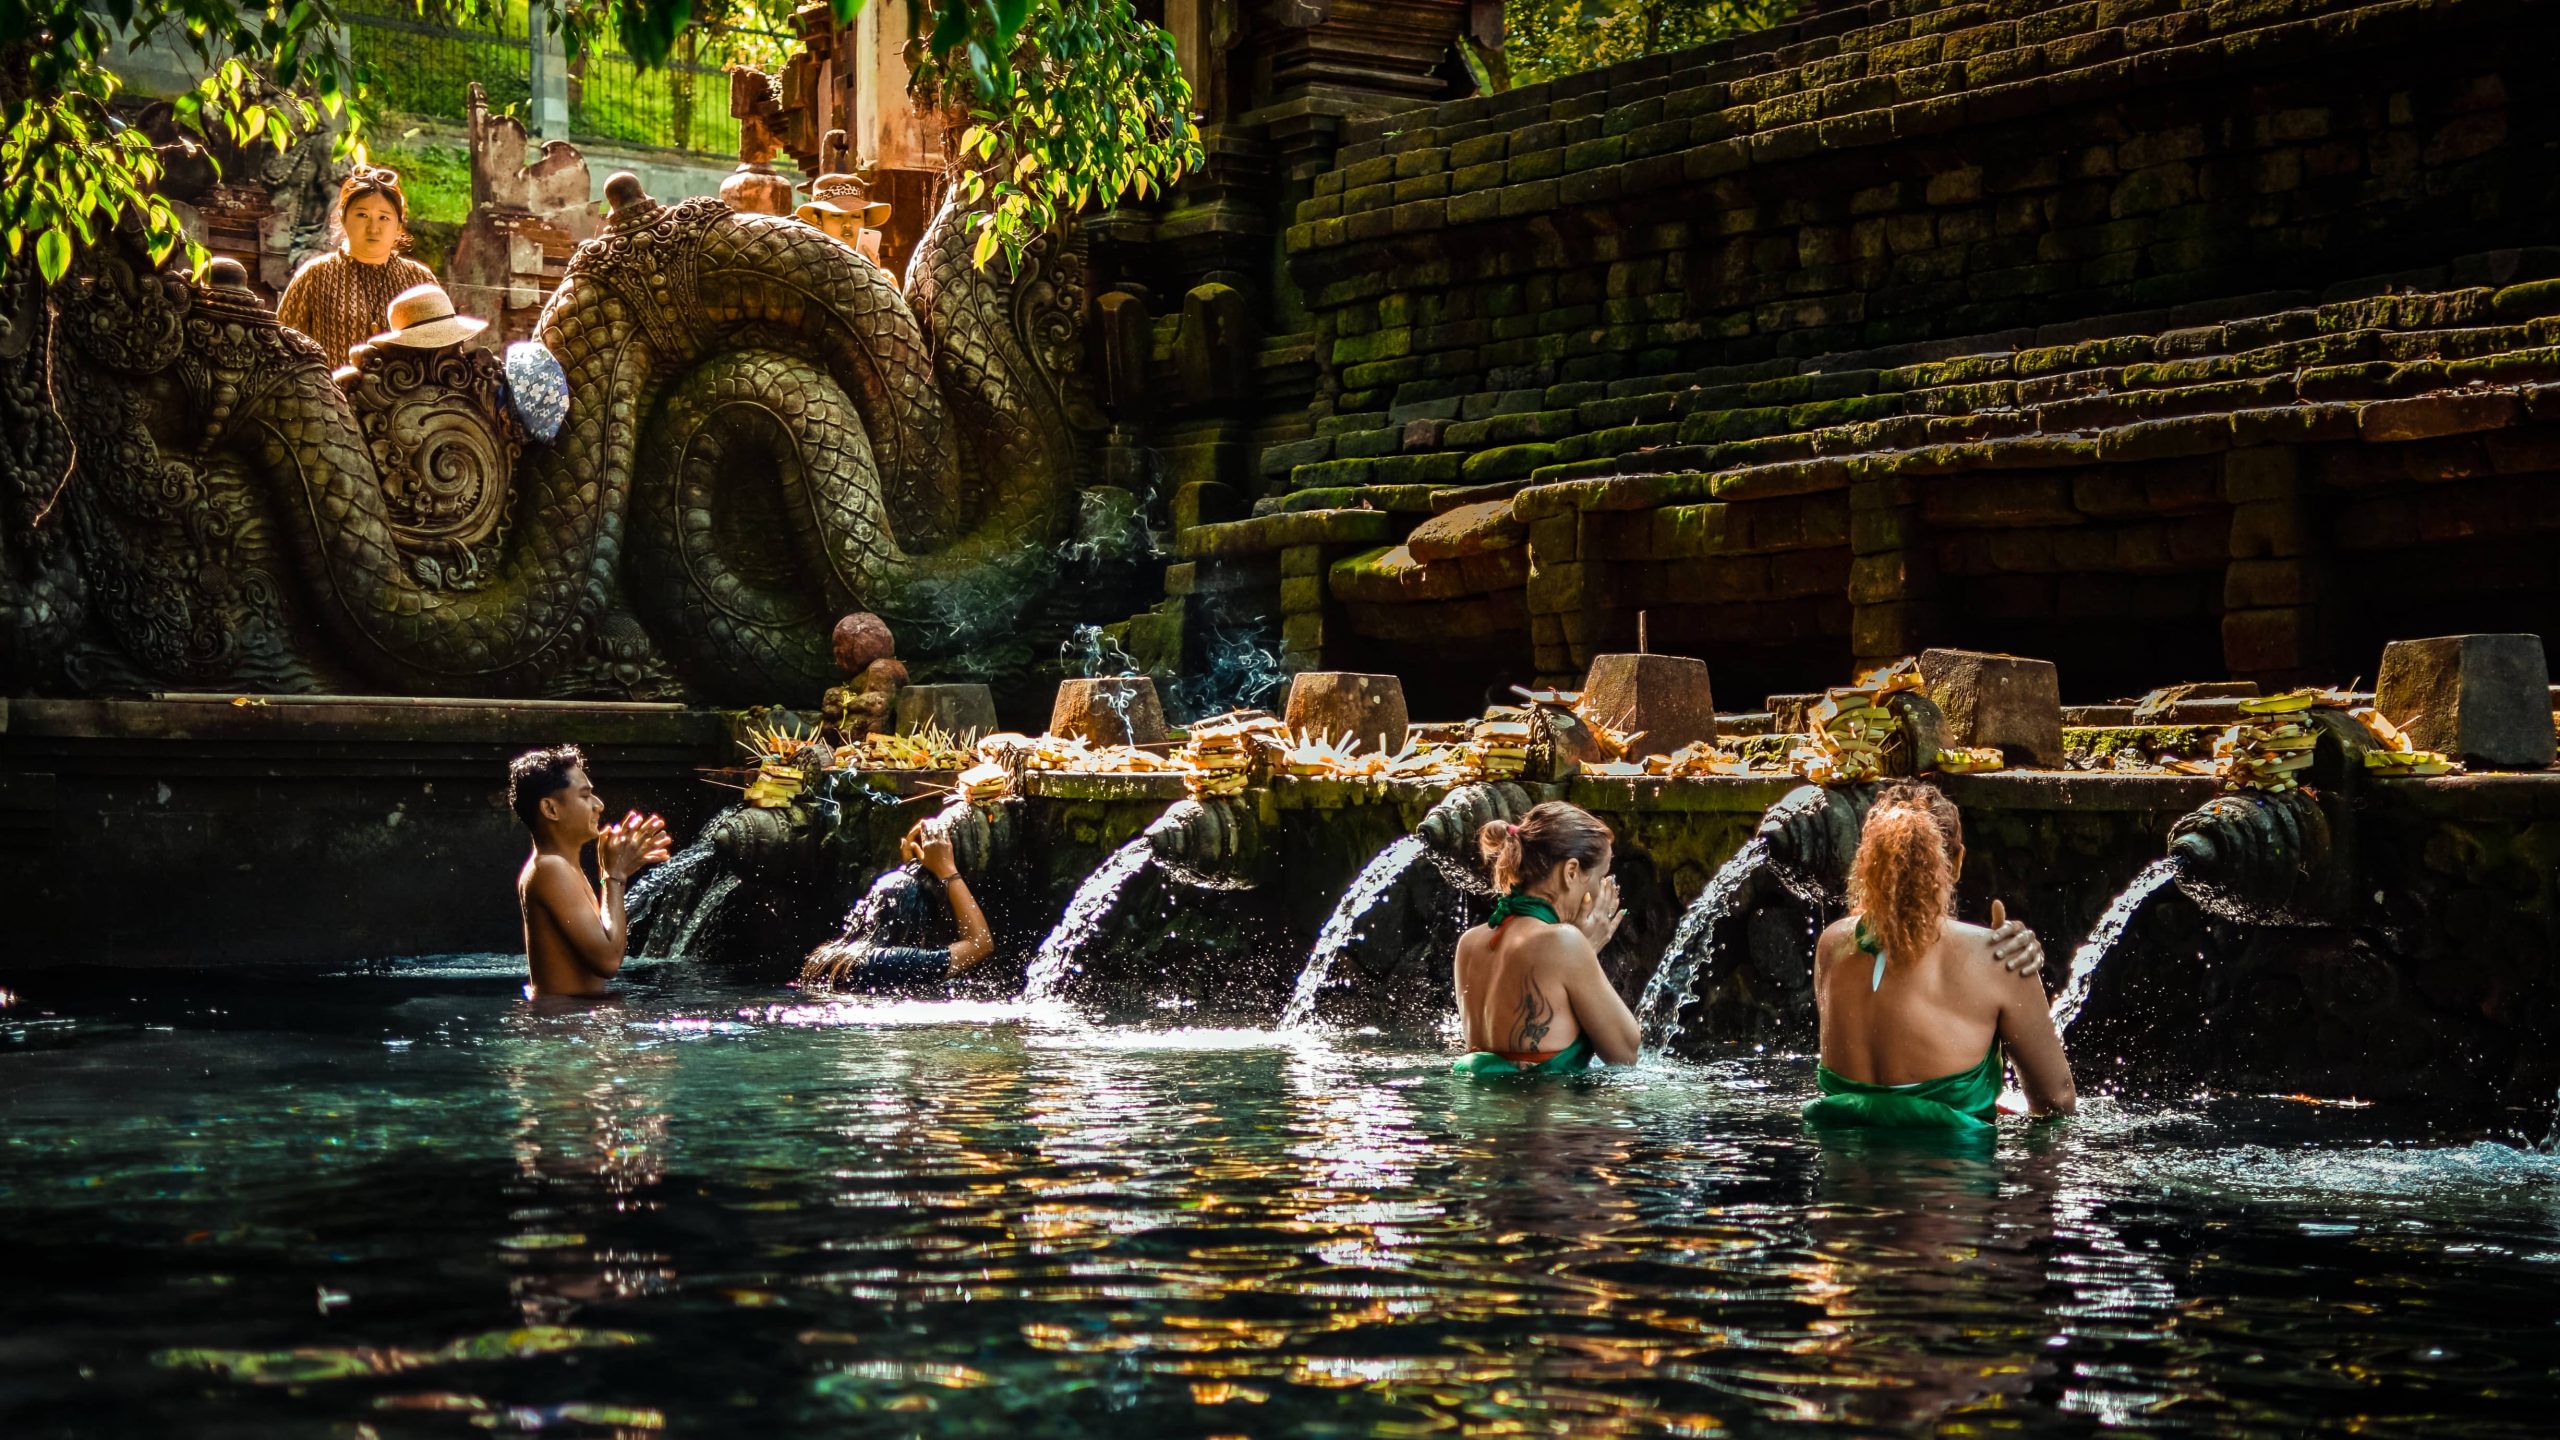 Tourists bathing in the waters of Tirta Empul Temple in Bali, Indonesia on a post about temple etiquette